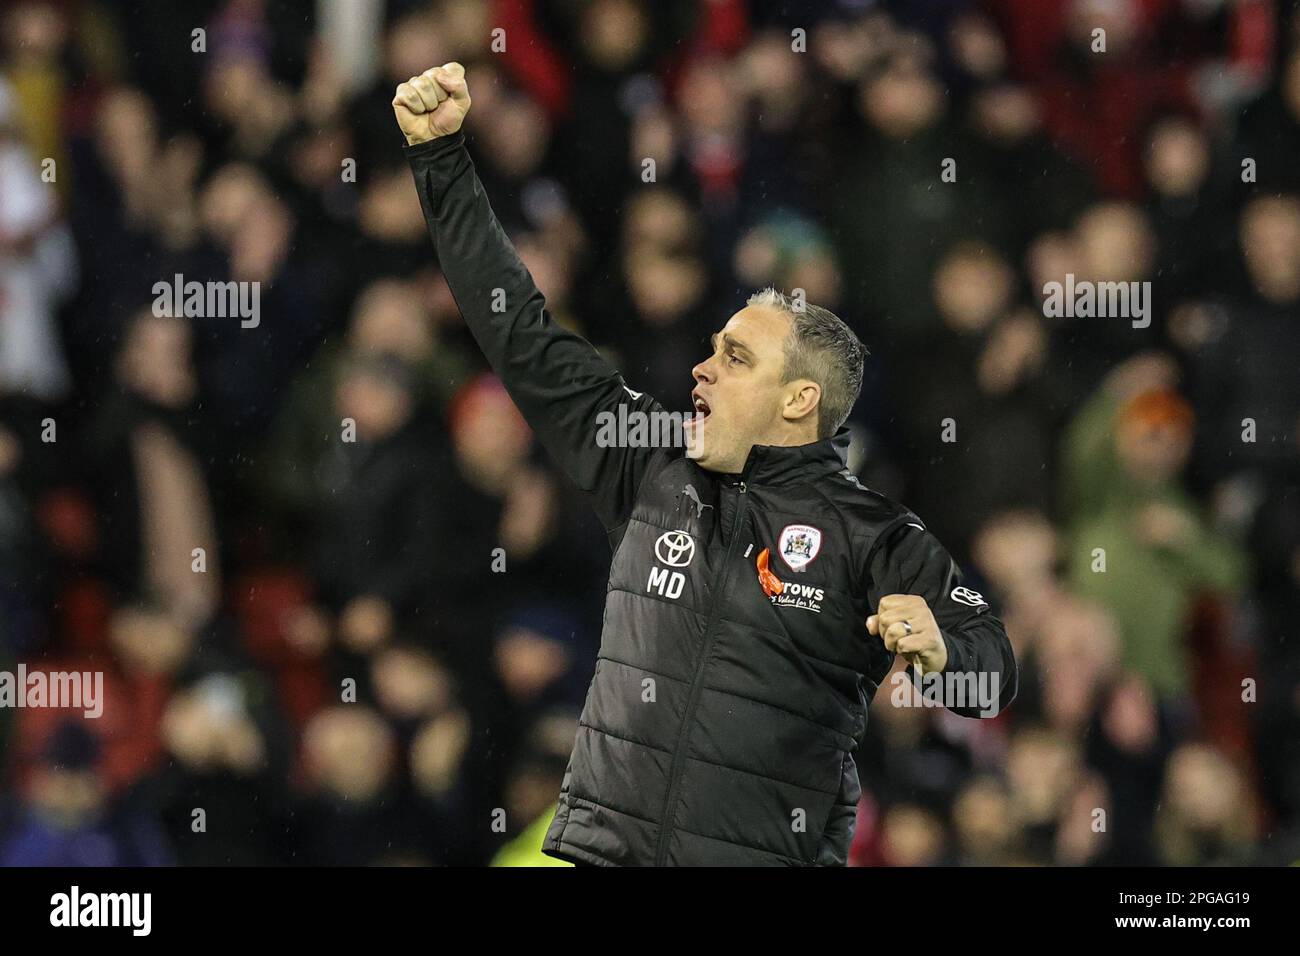 Michael Duff manager of Barnsley celebrates the 4-2 win during the Sky Bet League 1 match Barnsley vs Sheffield Wednesday at Oakwell, Barnsley, United Kingdom, 21st March 2023  (Photo by Mark Cosgrove/News Images) Stock Photo